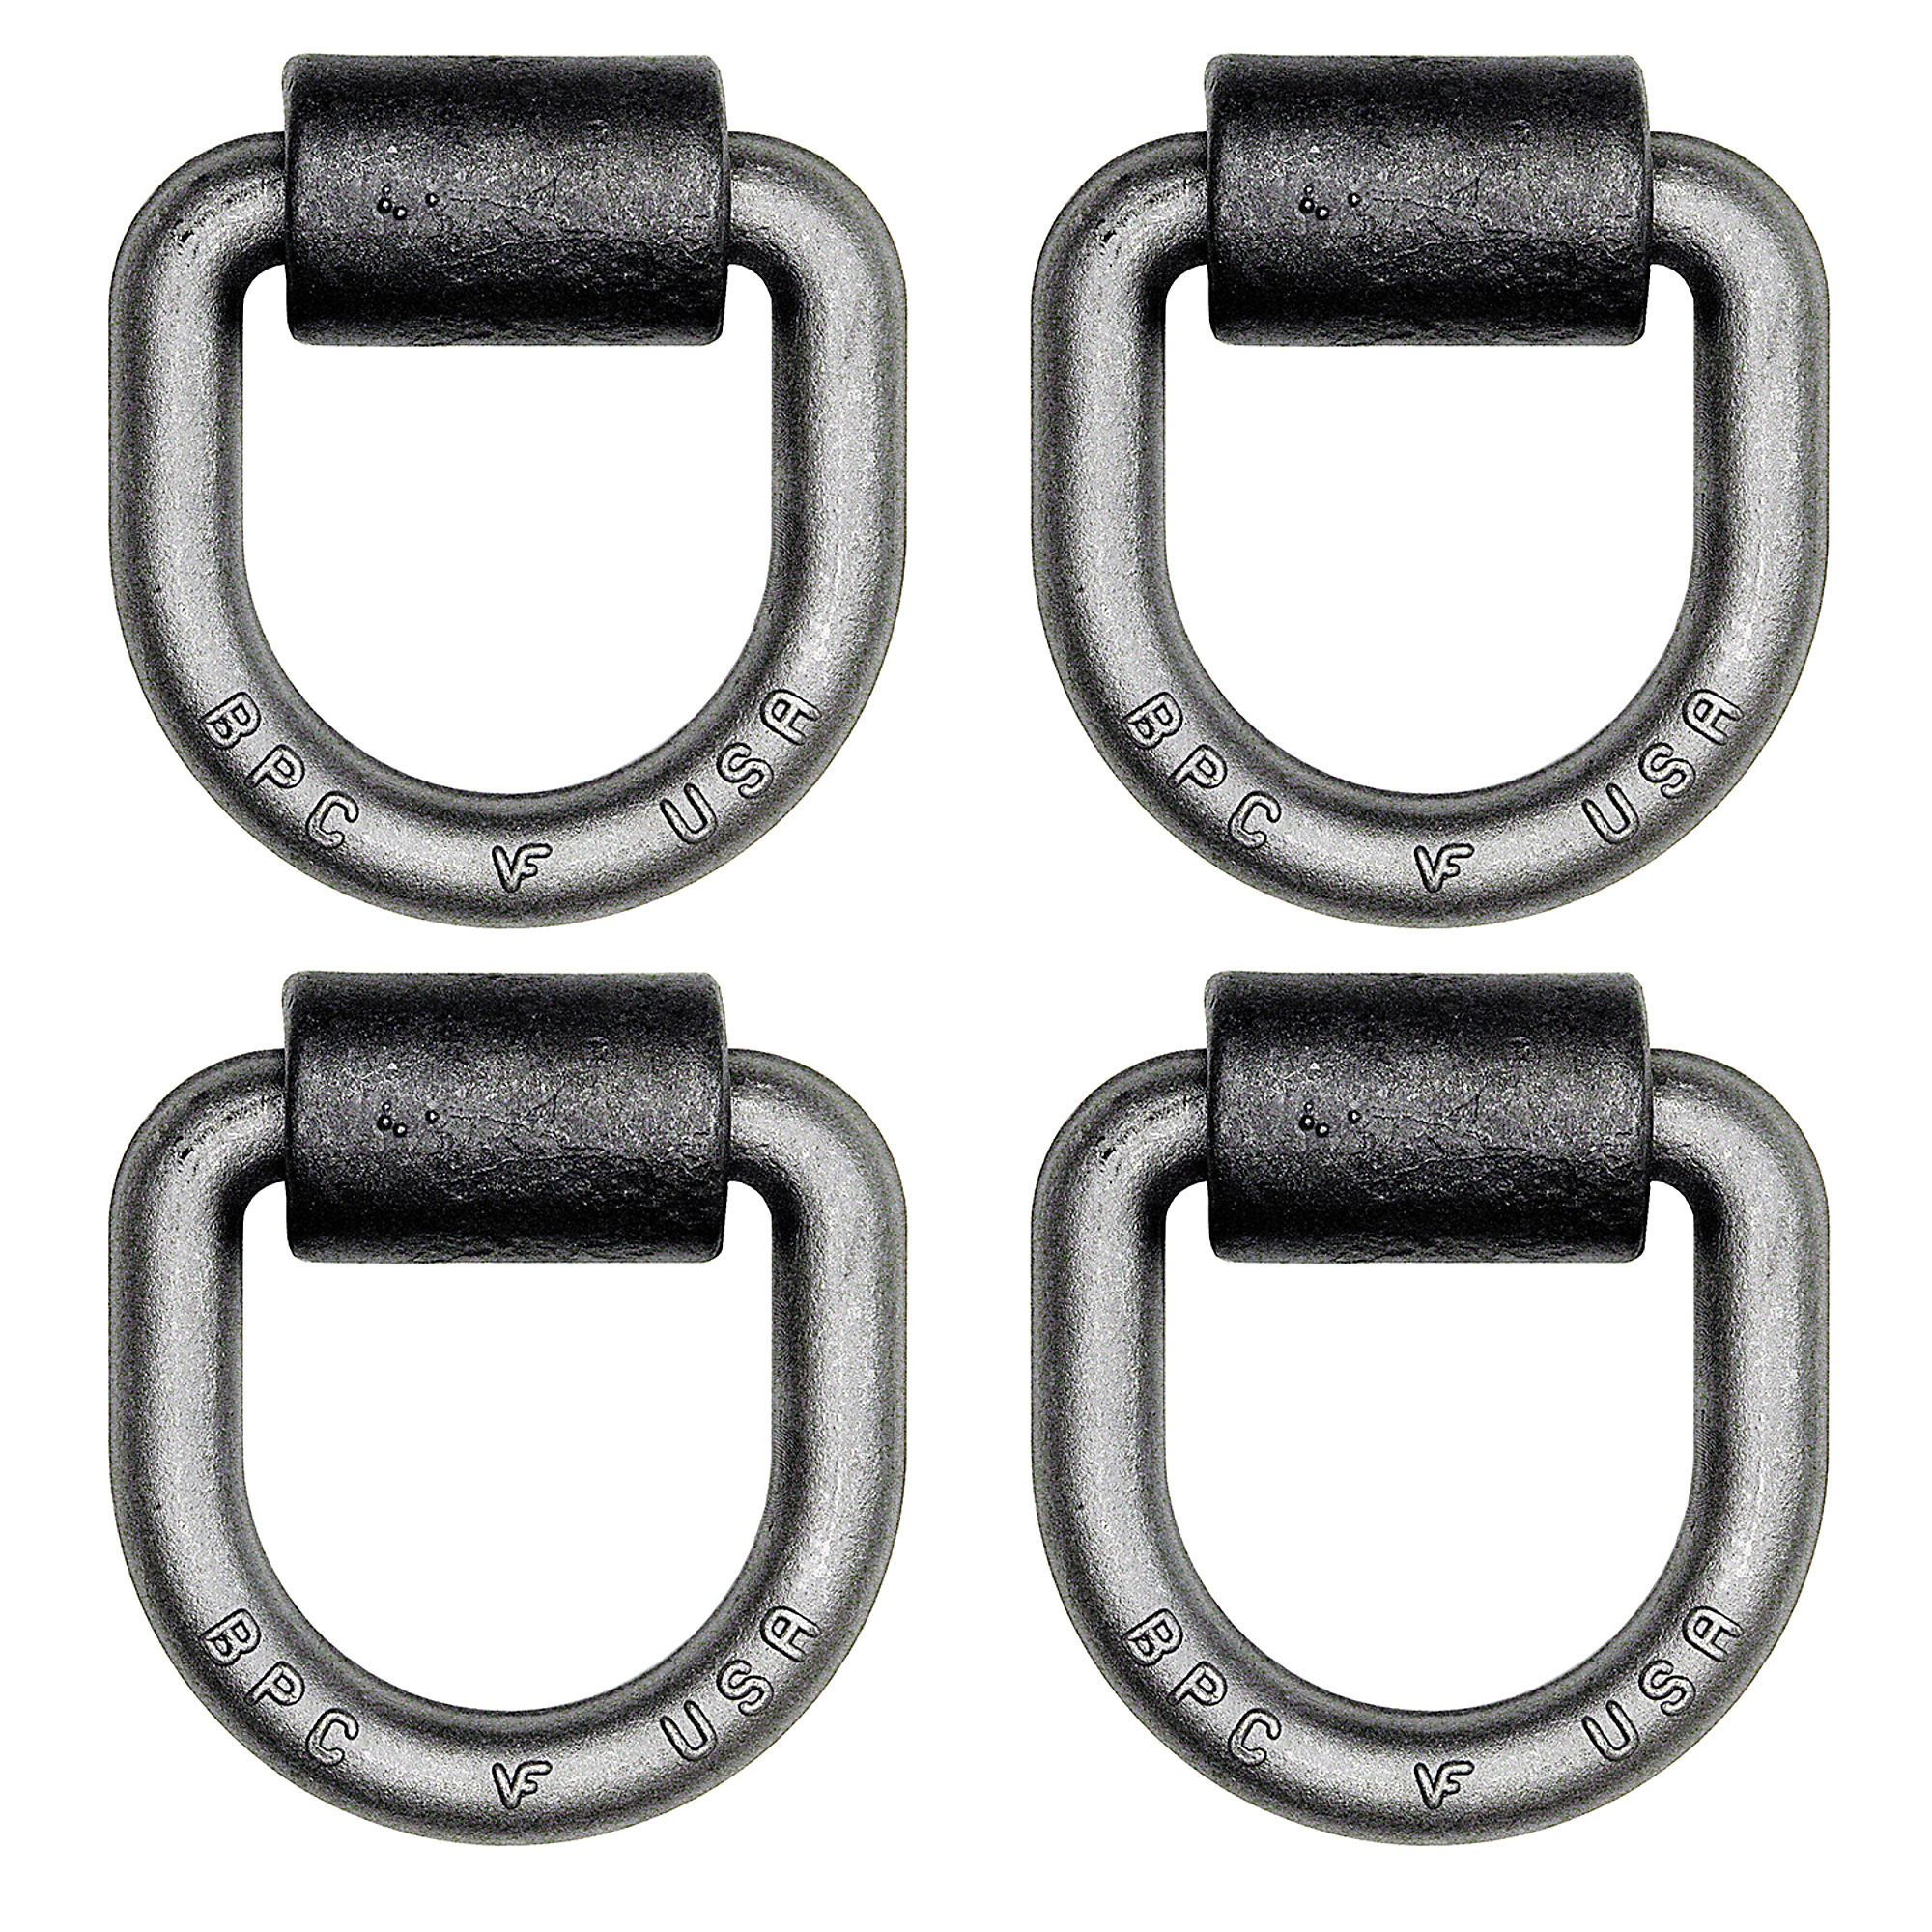 Buyers Products, D-RING, 3/4 DIA3InchX3Inch, FORGED, W/BRKT, 4PK, Diameter 0.75 in, Working Load 9120 Included (qty.) 4 Model B464